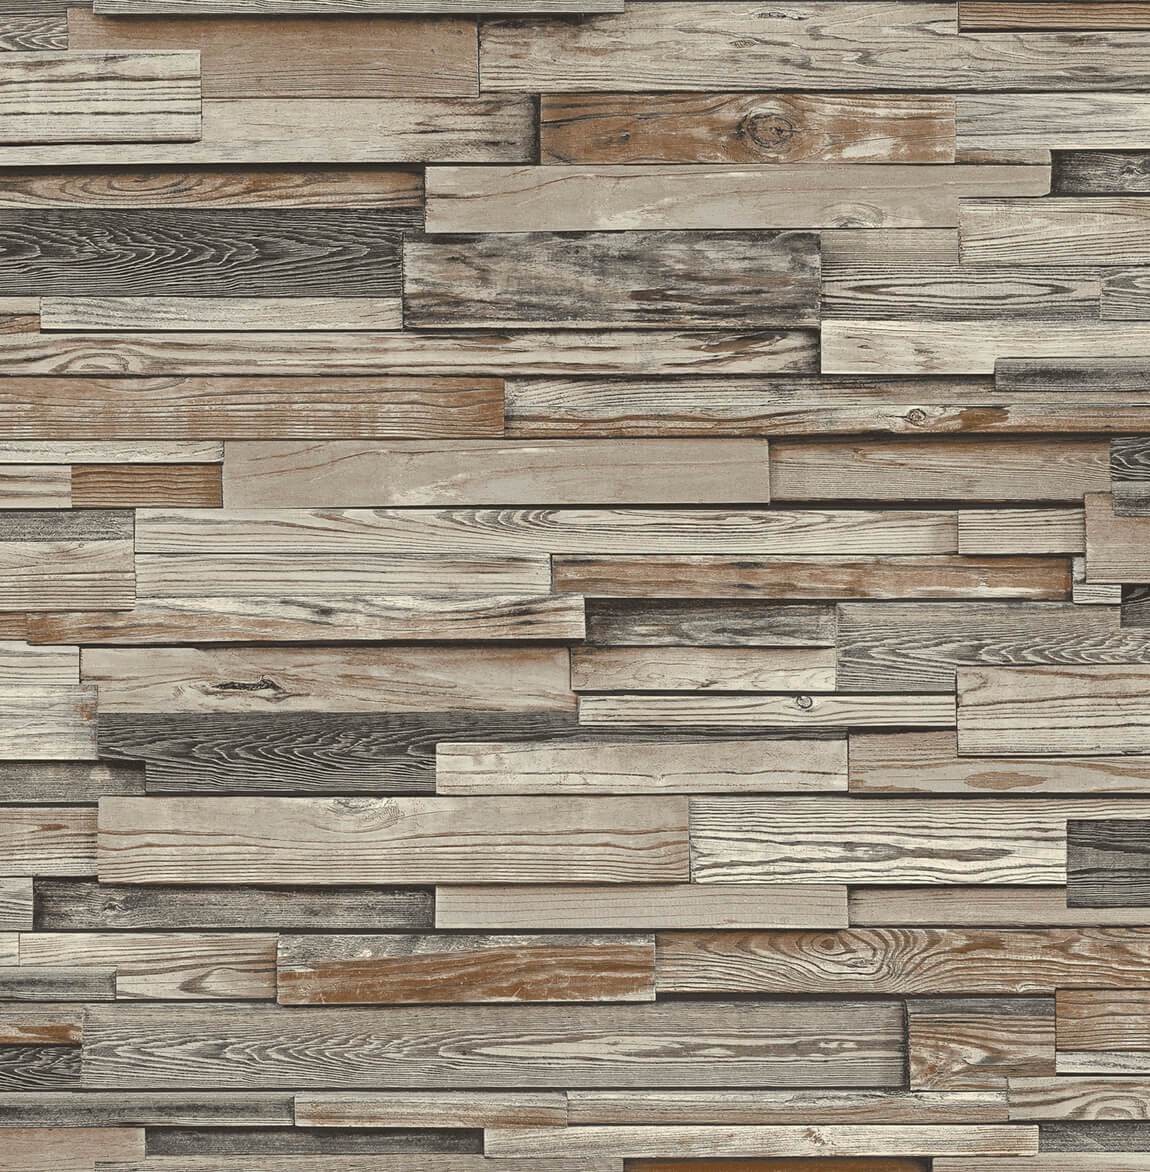 Reclaimed Wood Plank Peel And Stick Wallpaper In Charcoal And Brown By